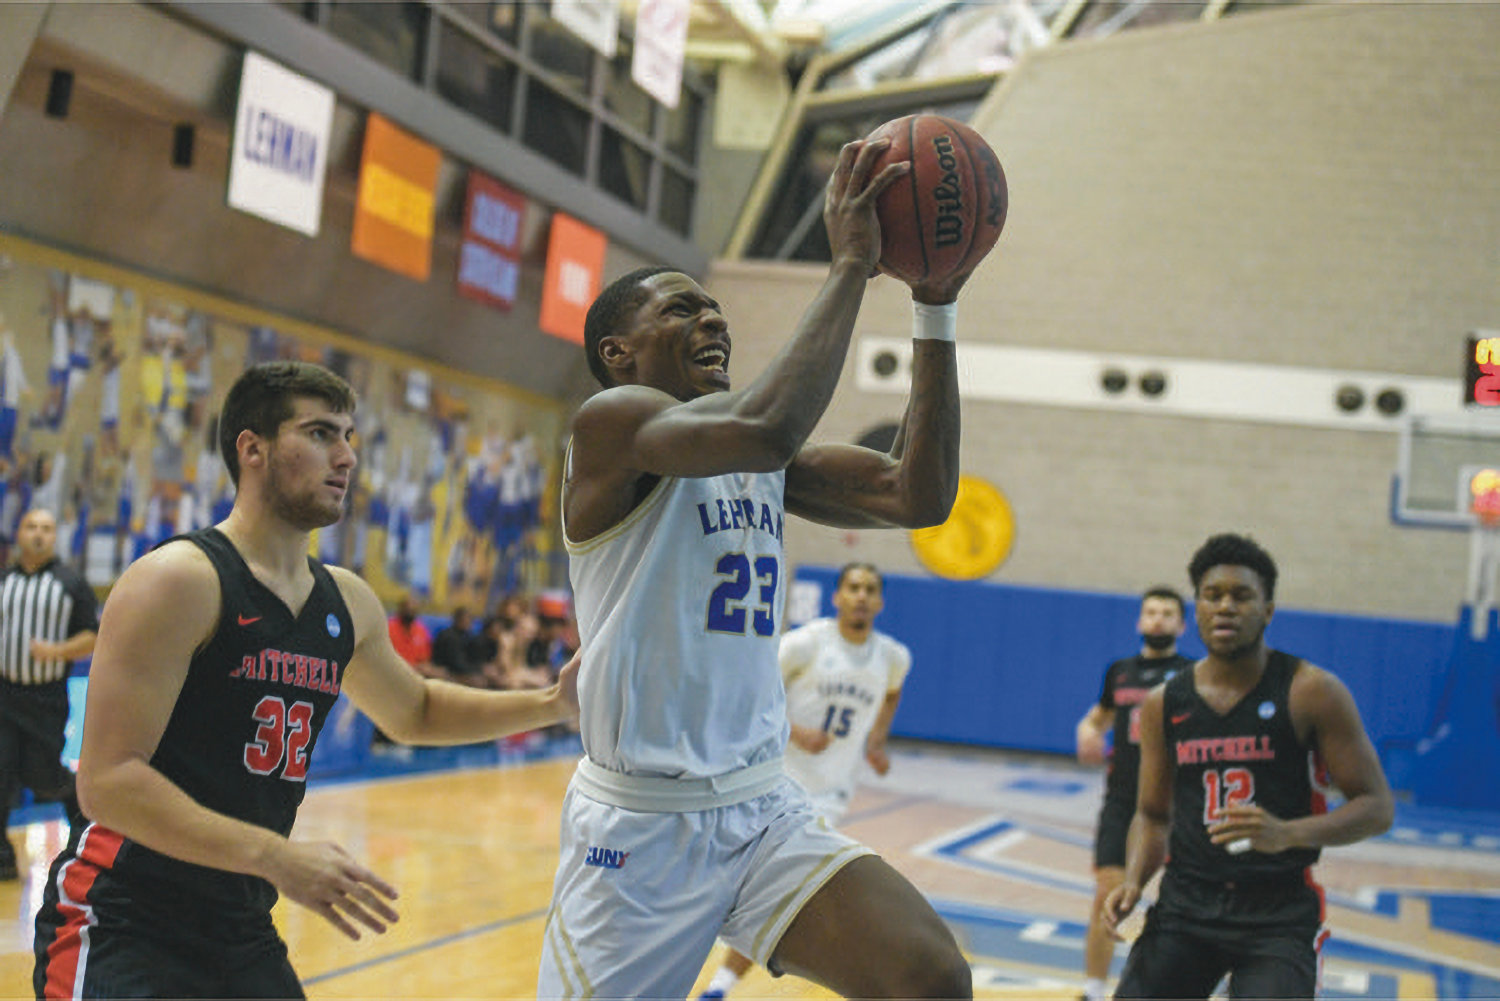 With 29 points in a 79-64 win over Pratt Institute in early December, senior Isaiah Geathers of Lehman College became the all-time leading scorer in the college’s men’s basketball history. As of Dec. 7, Geathers had 1,514 points. The previous leading scorer was Duane Rhoden, who had amassed 1,497 point playing for the 6-4 Lightning from 2005-2009. The school was scheduled to present Geathers with something Dec. 14 before its game against St. Joseph’s College.